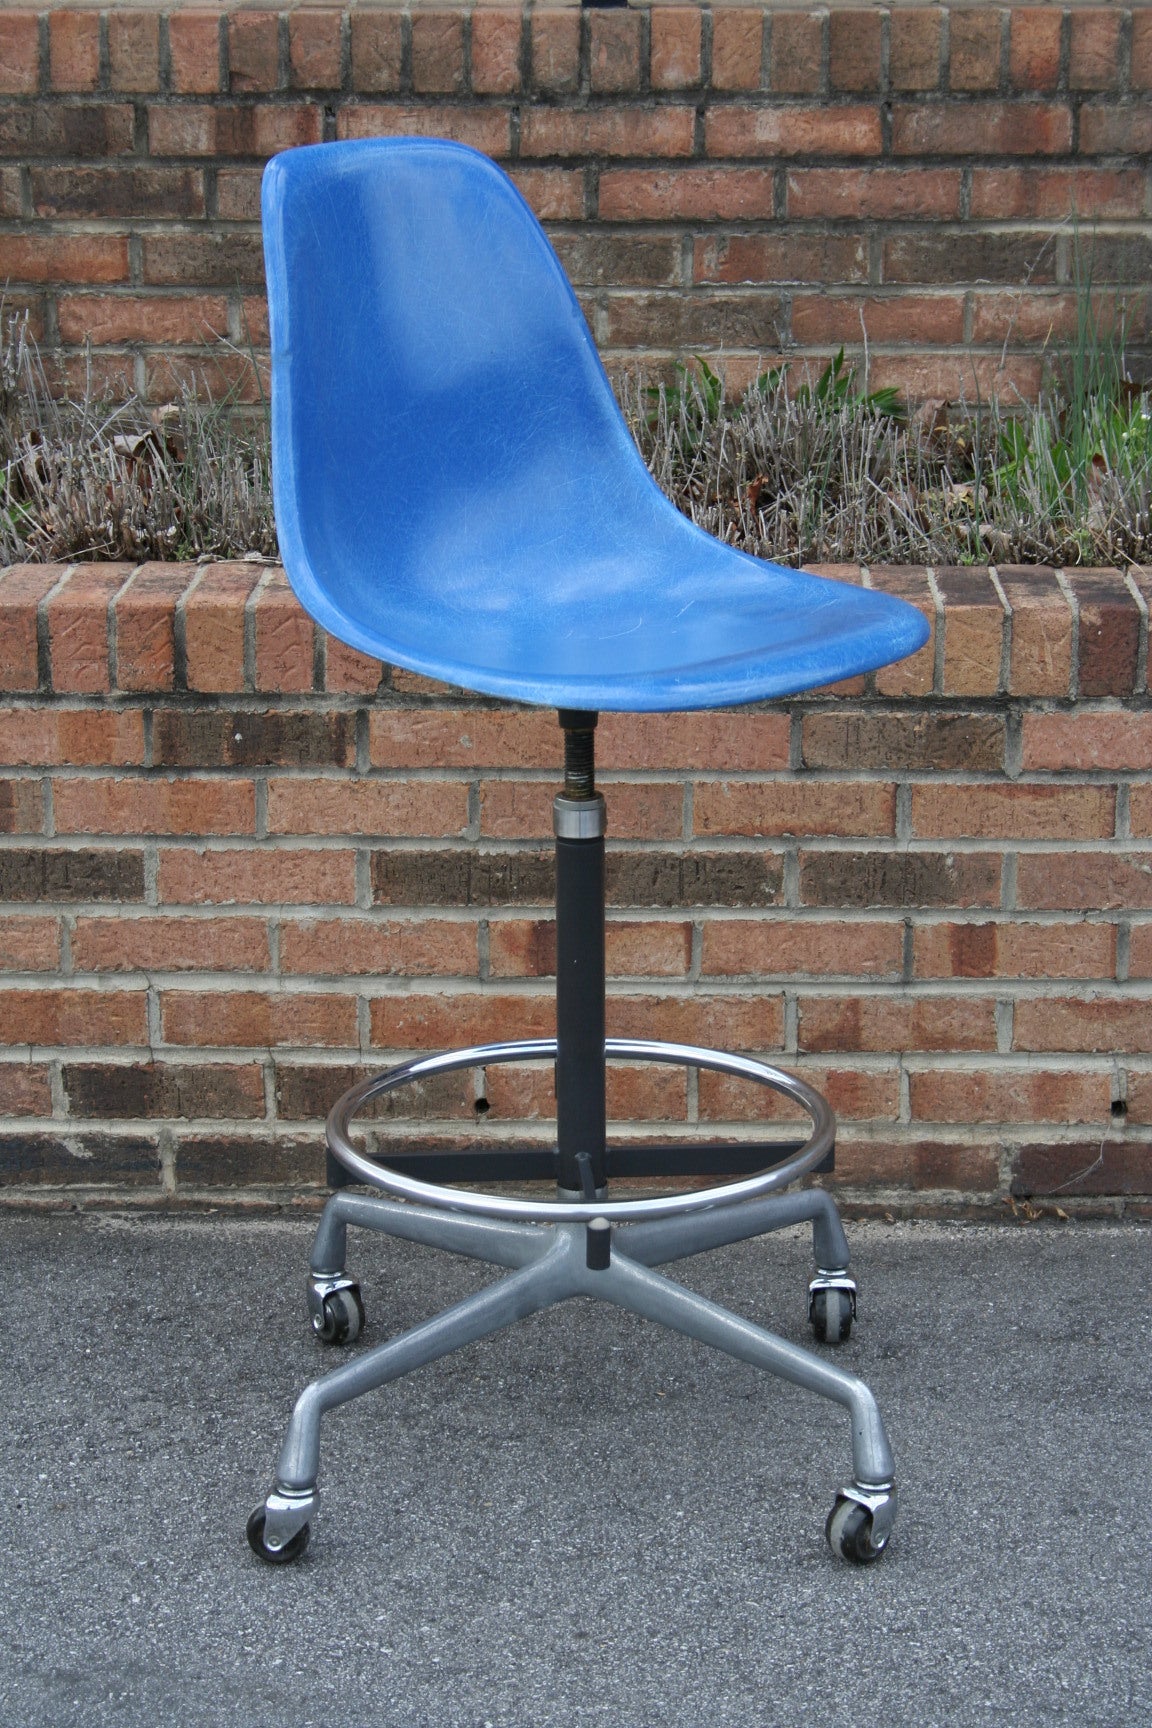 A Drafting Chair by Charles Eames for Herman Miller